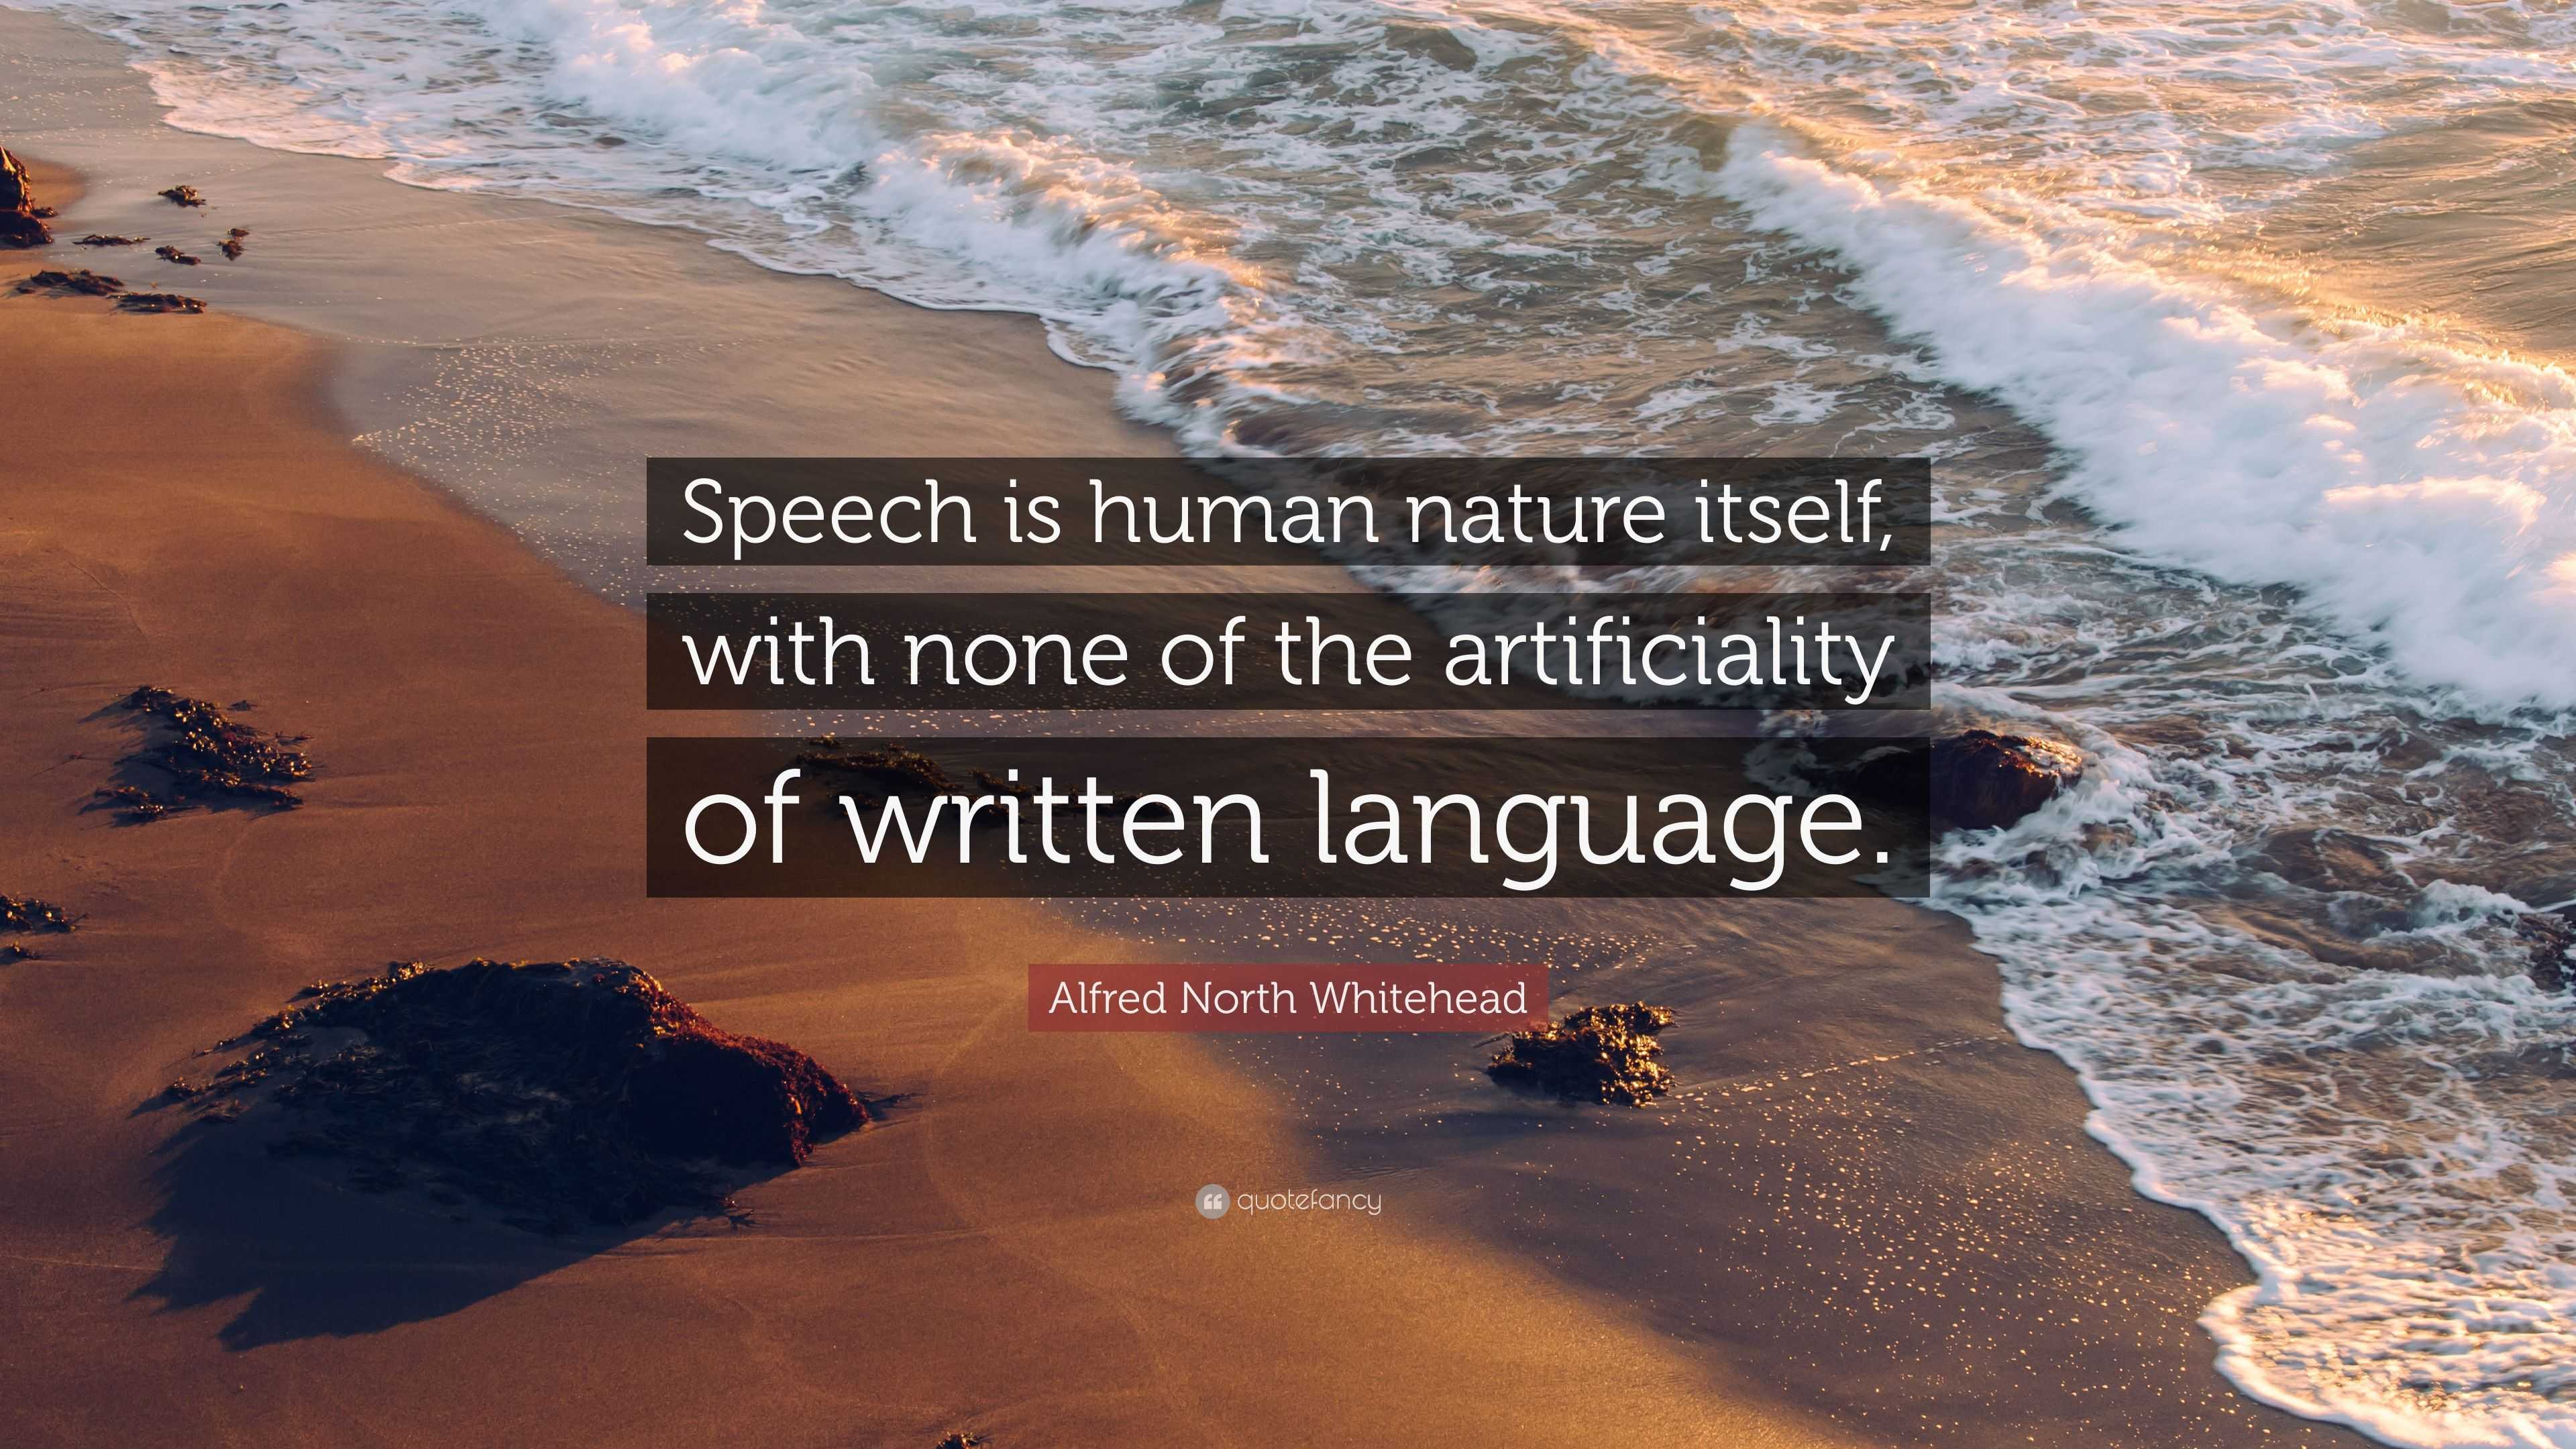 Alfred North Whitehead Quote “Speech is human nature itself, with none